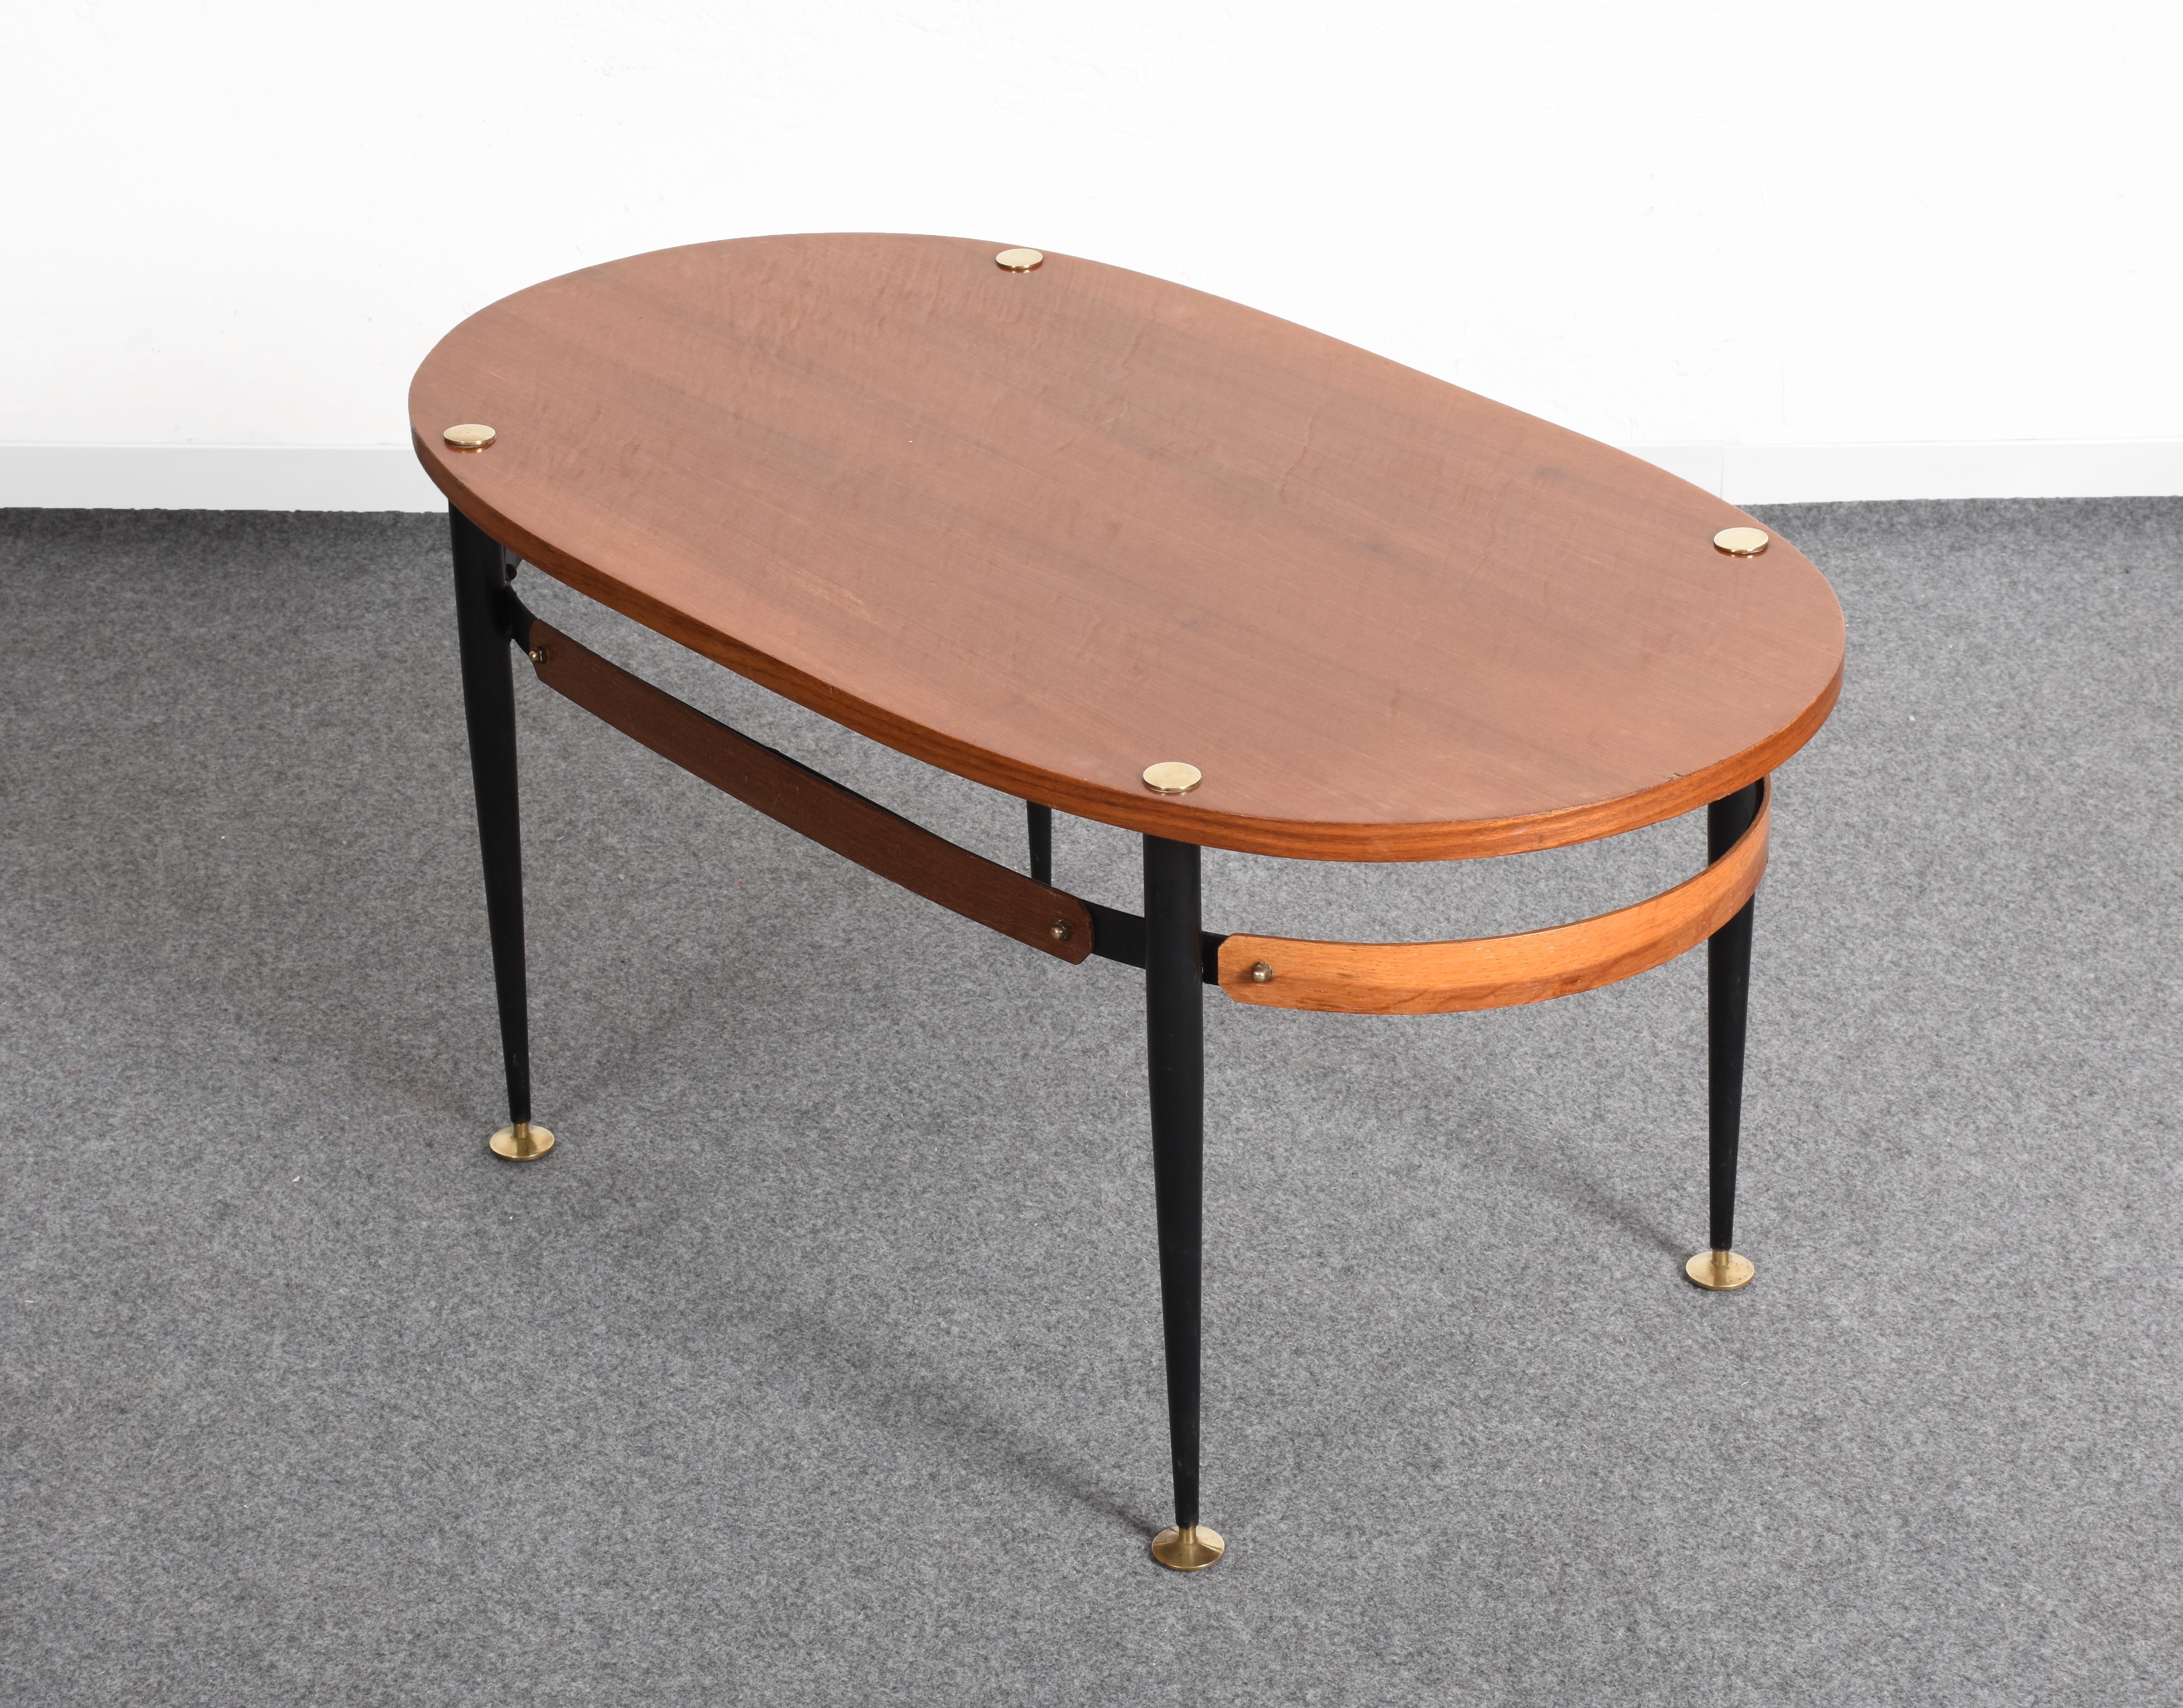 Beautiful midcentury oval coffee table in Iron and Teak Wood. This item was designed in Italy during 1950s by Silvio Cavatorta.

It has a very elegant oval-shaped top mounted on painted iron legs. The feet and supports of the top are in solid